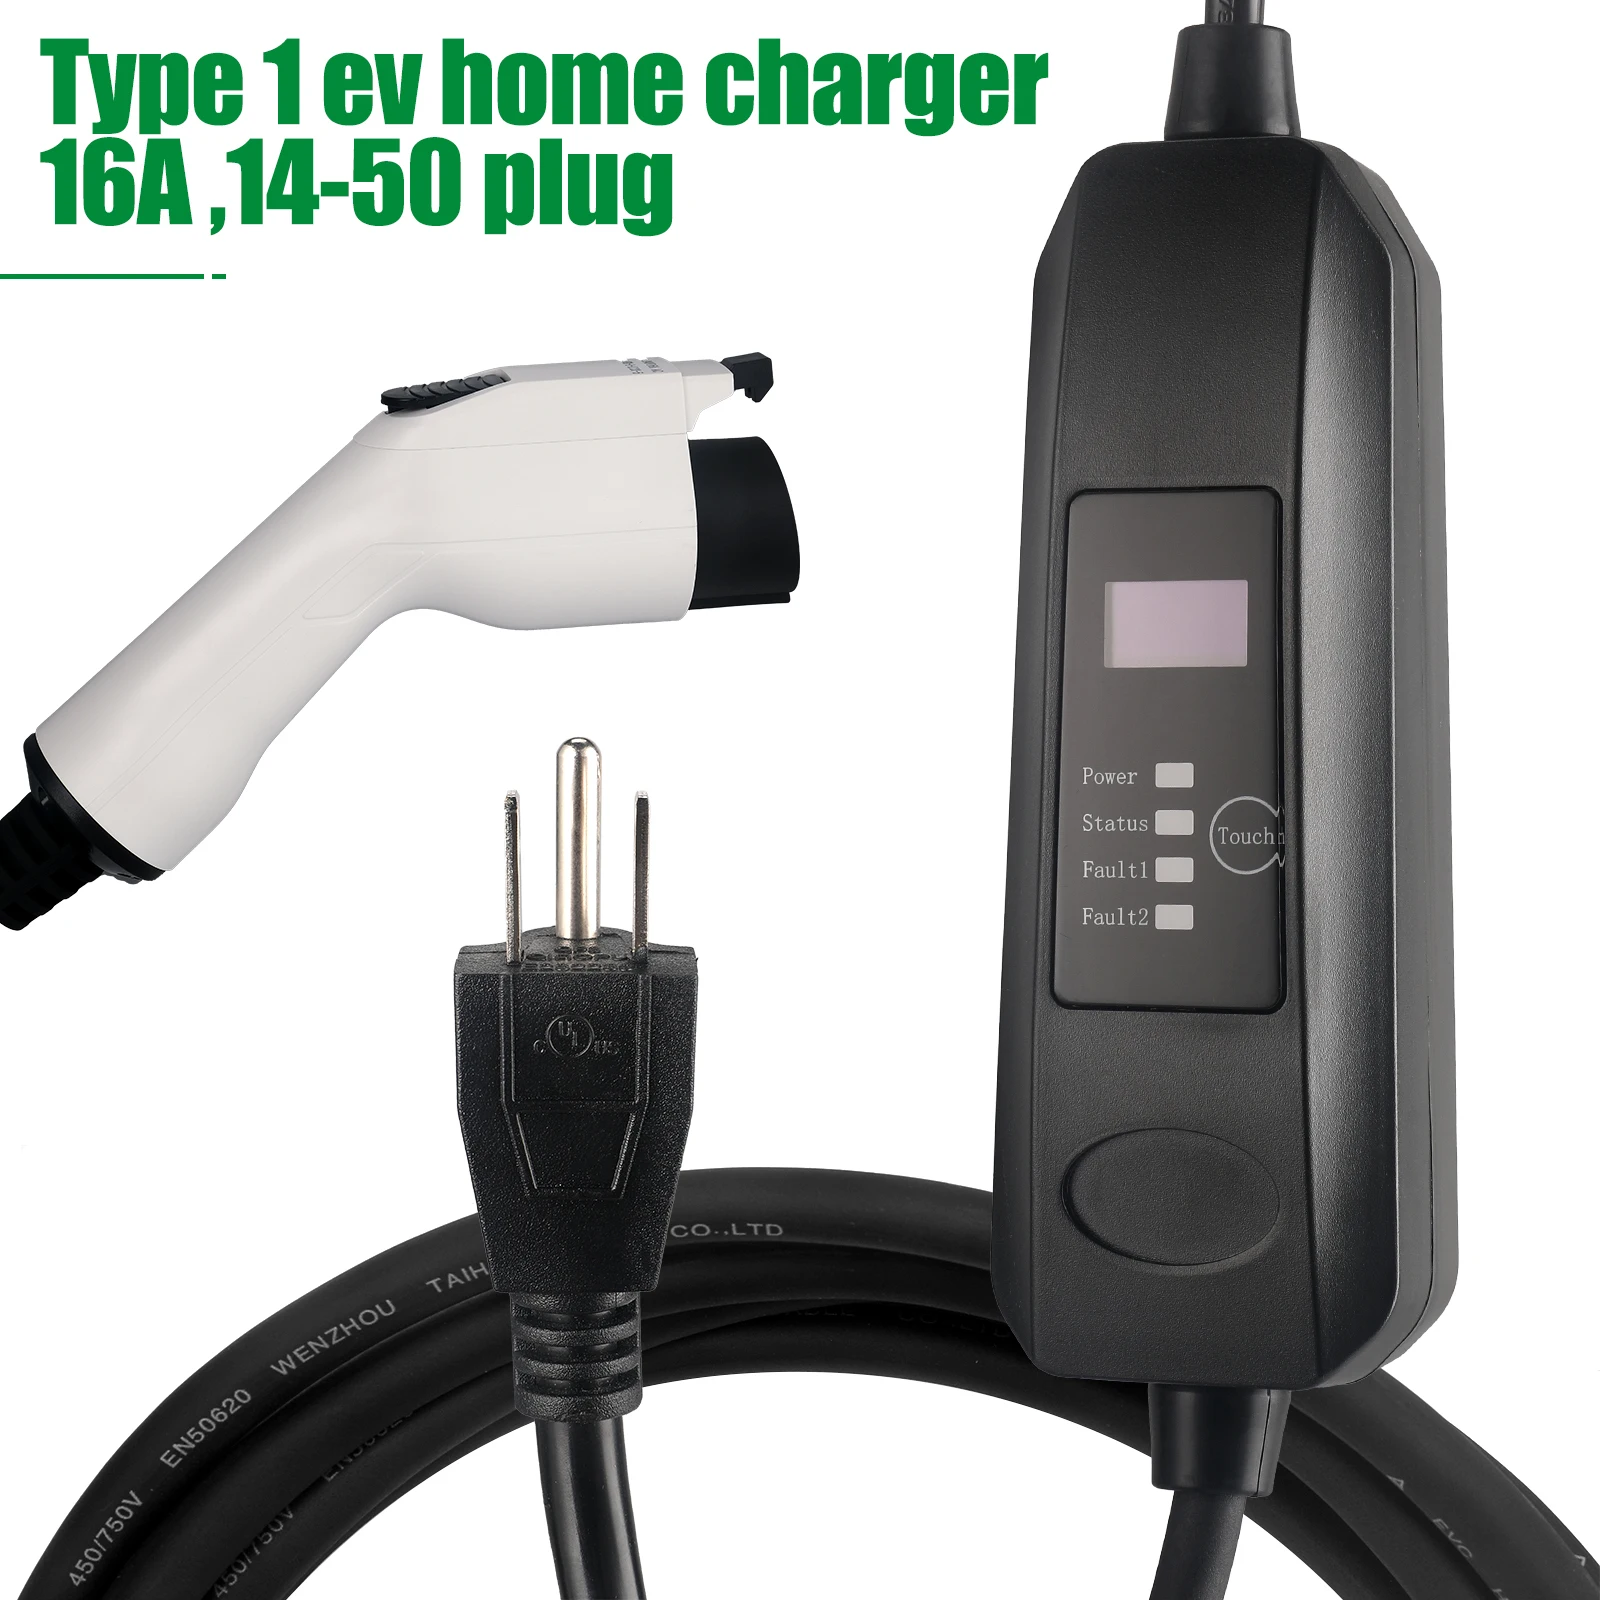 

Type1 Electric Car Charger 16a Portable EV Charger Nema14-50 Plug J1772 3.5kw EVSE Wall box Controller For Electric Vehicles